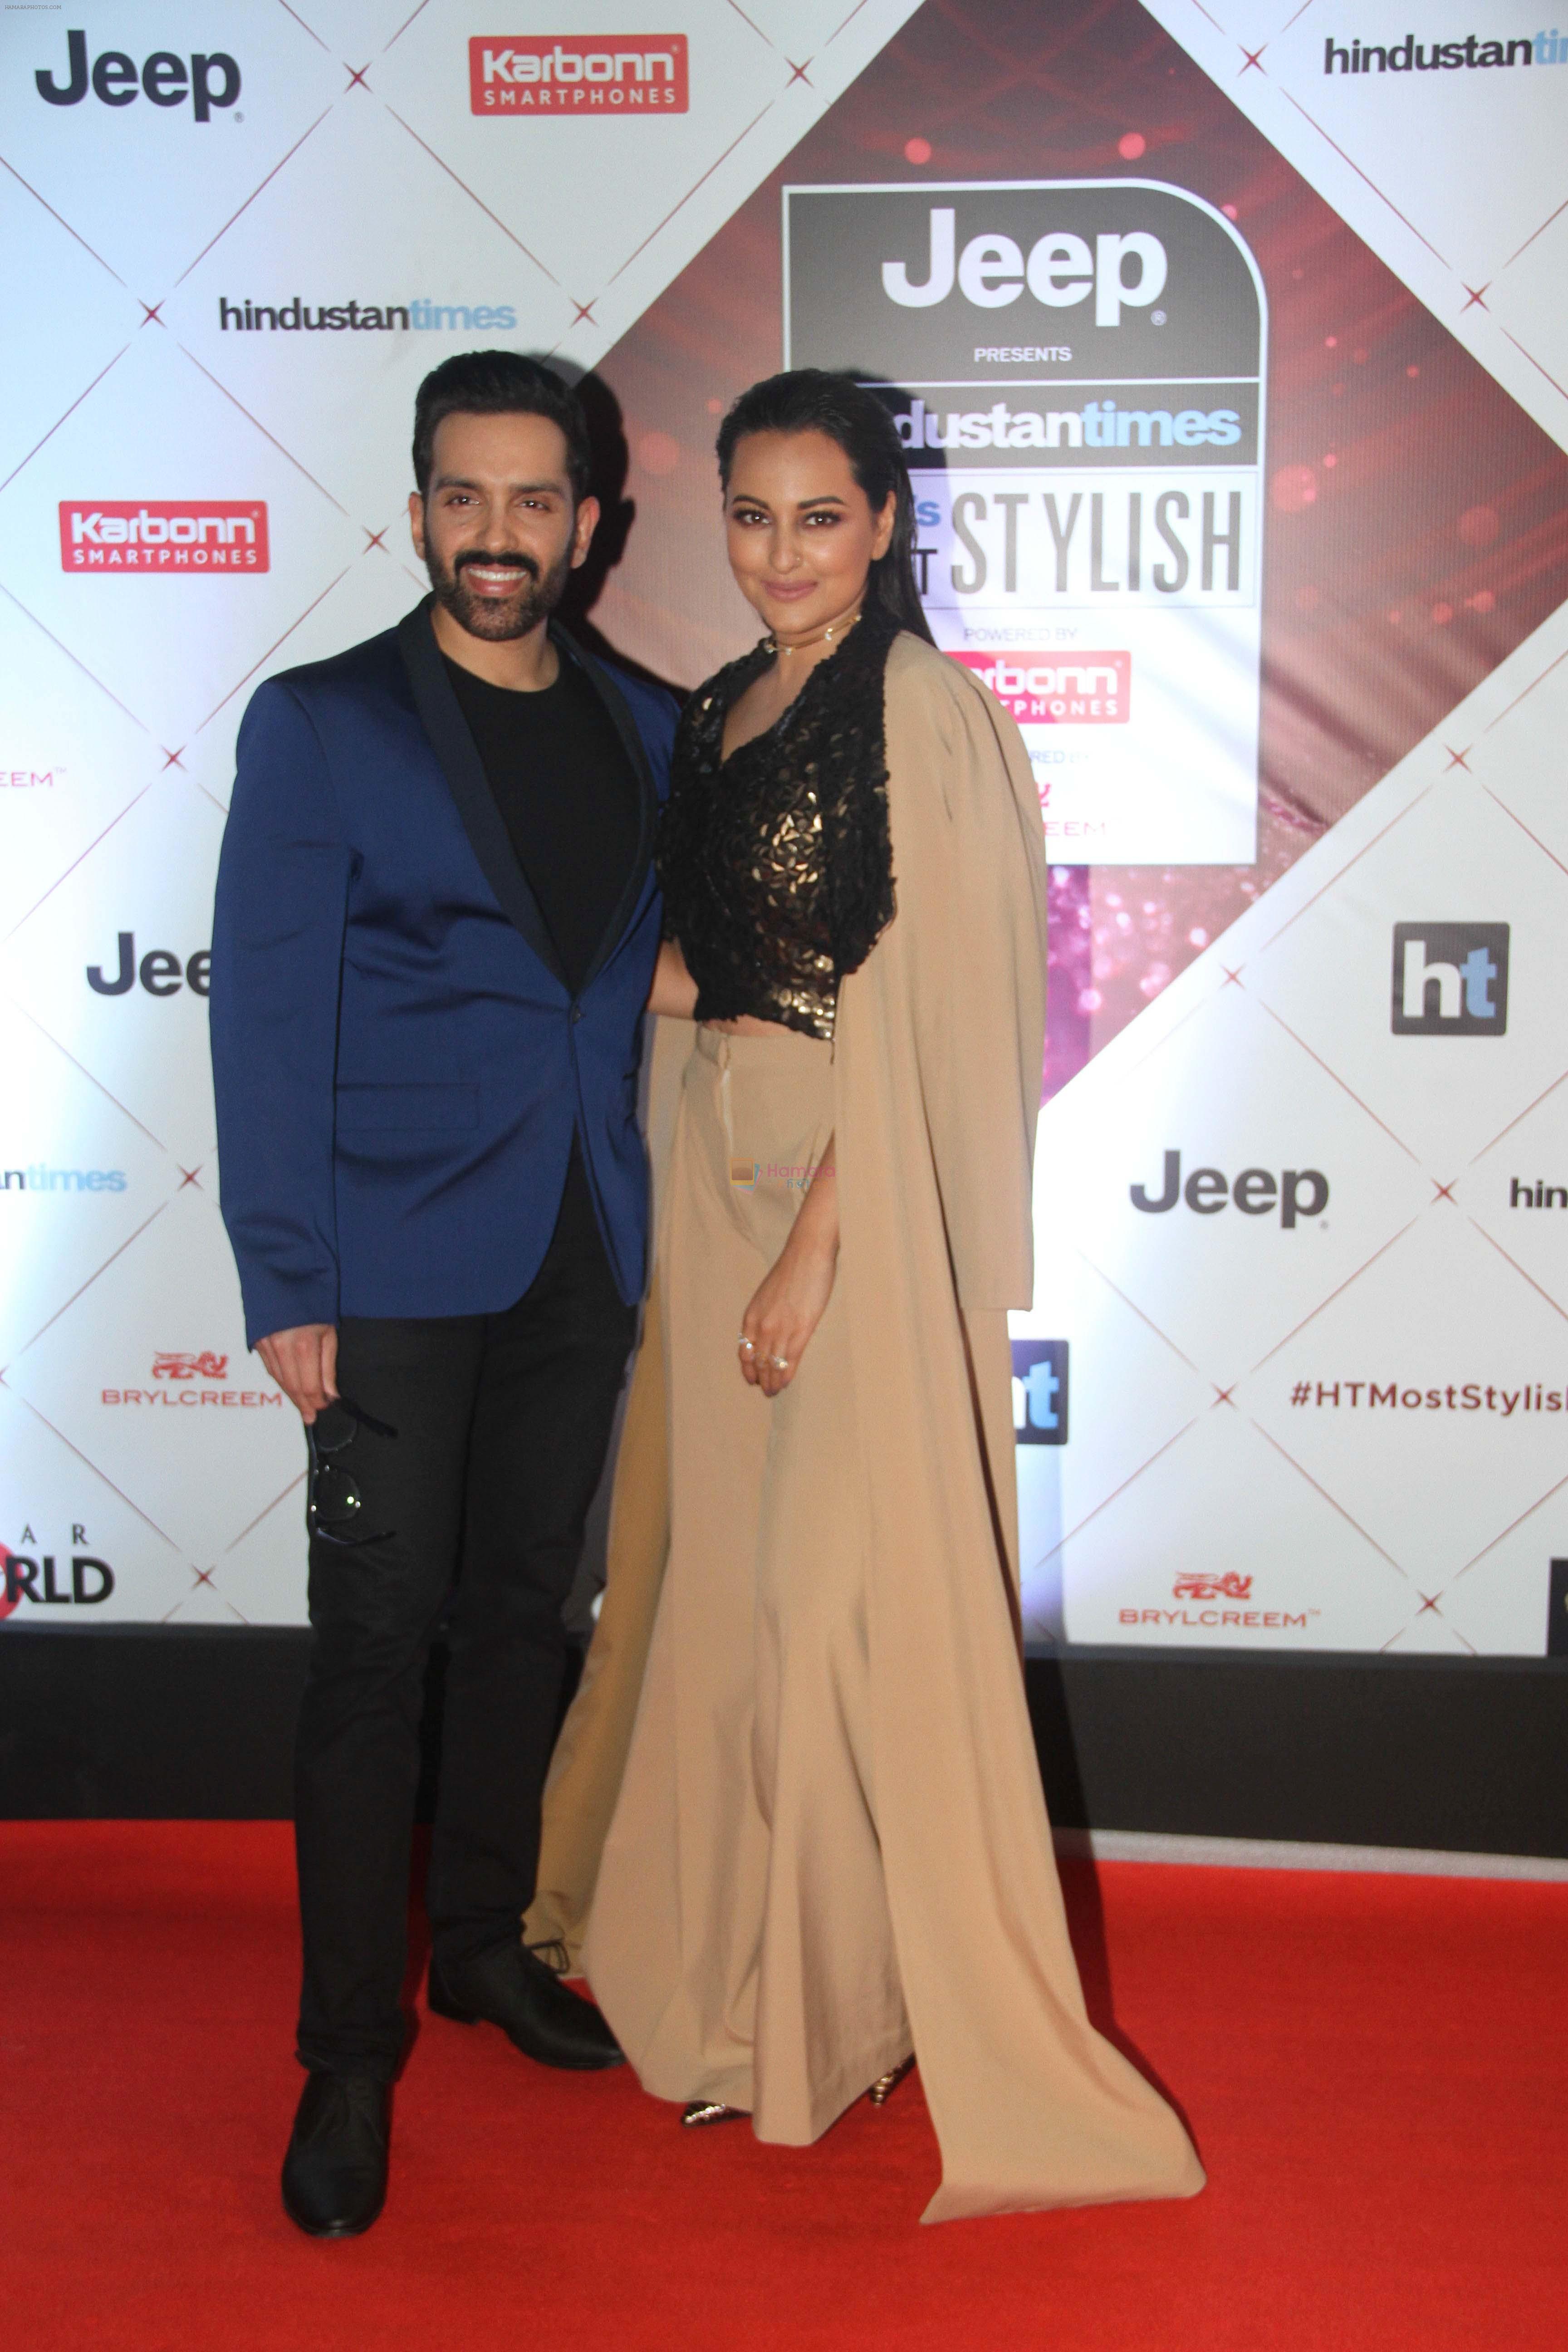 Sonakshi Sinha, Luv Sinha at the Red Carpet Of Ht Most Stylish Awards 2018 on 24th Jan 2018